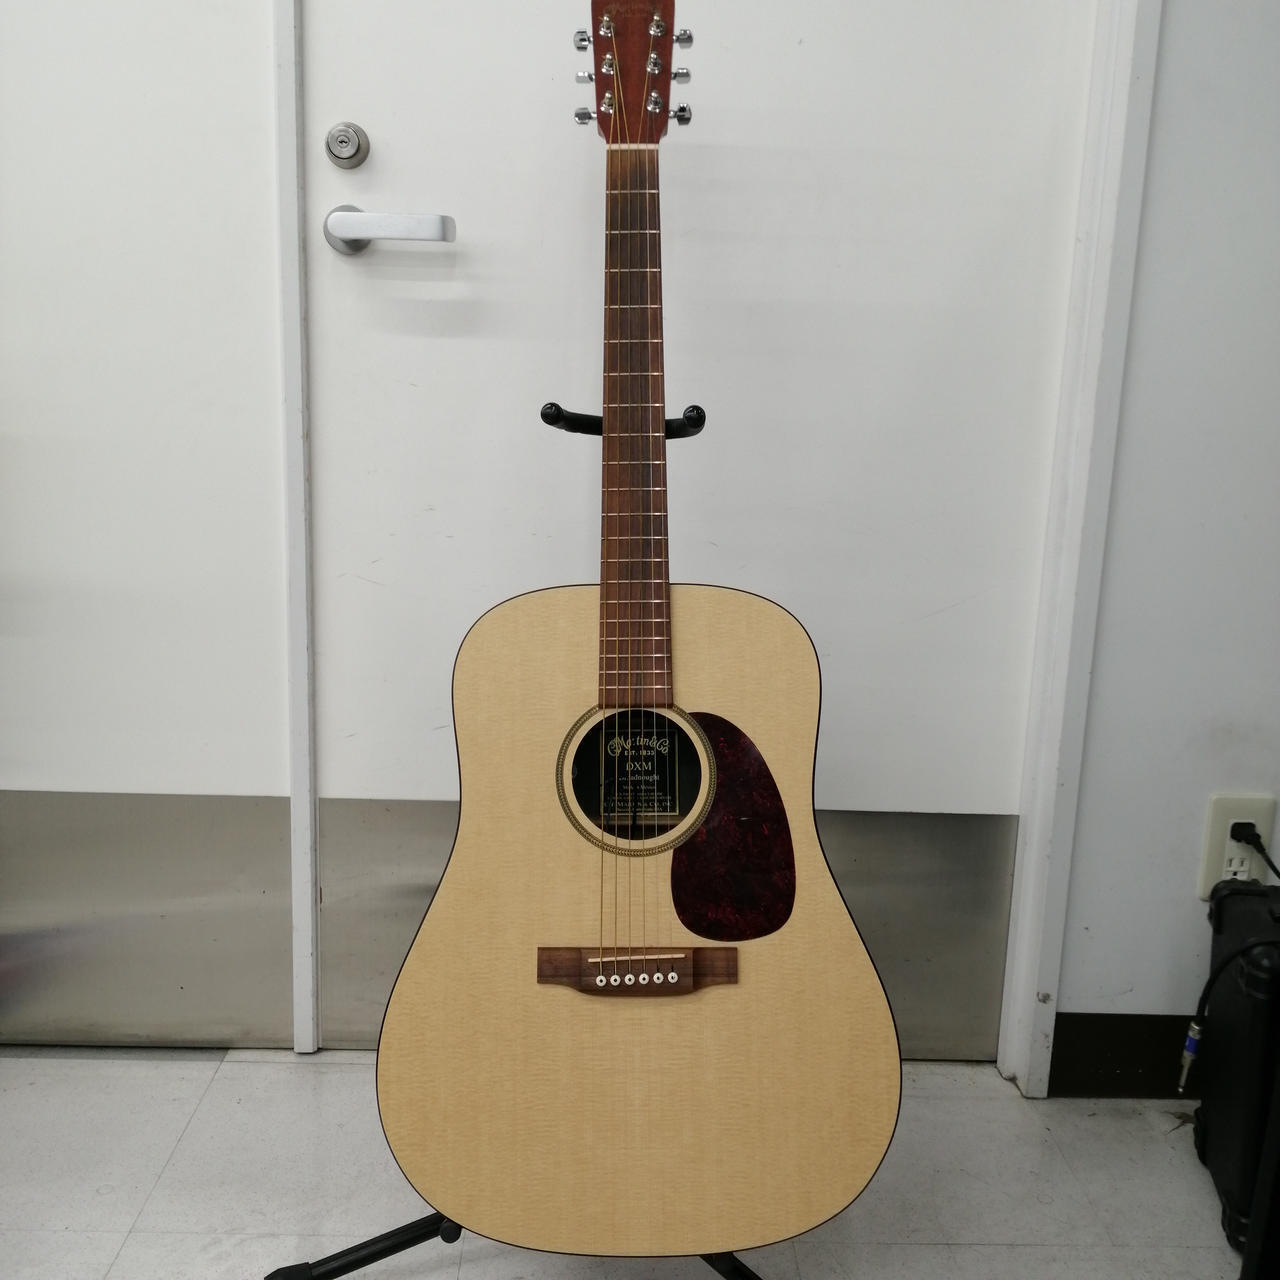 Martin Dxm Fishman Acoustic Guitar With Pickup